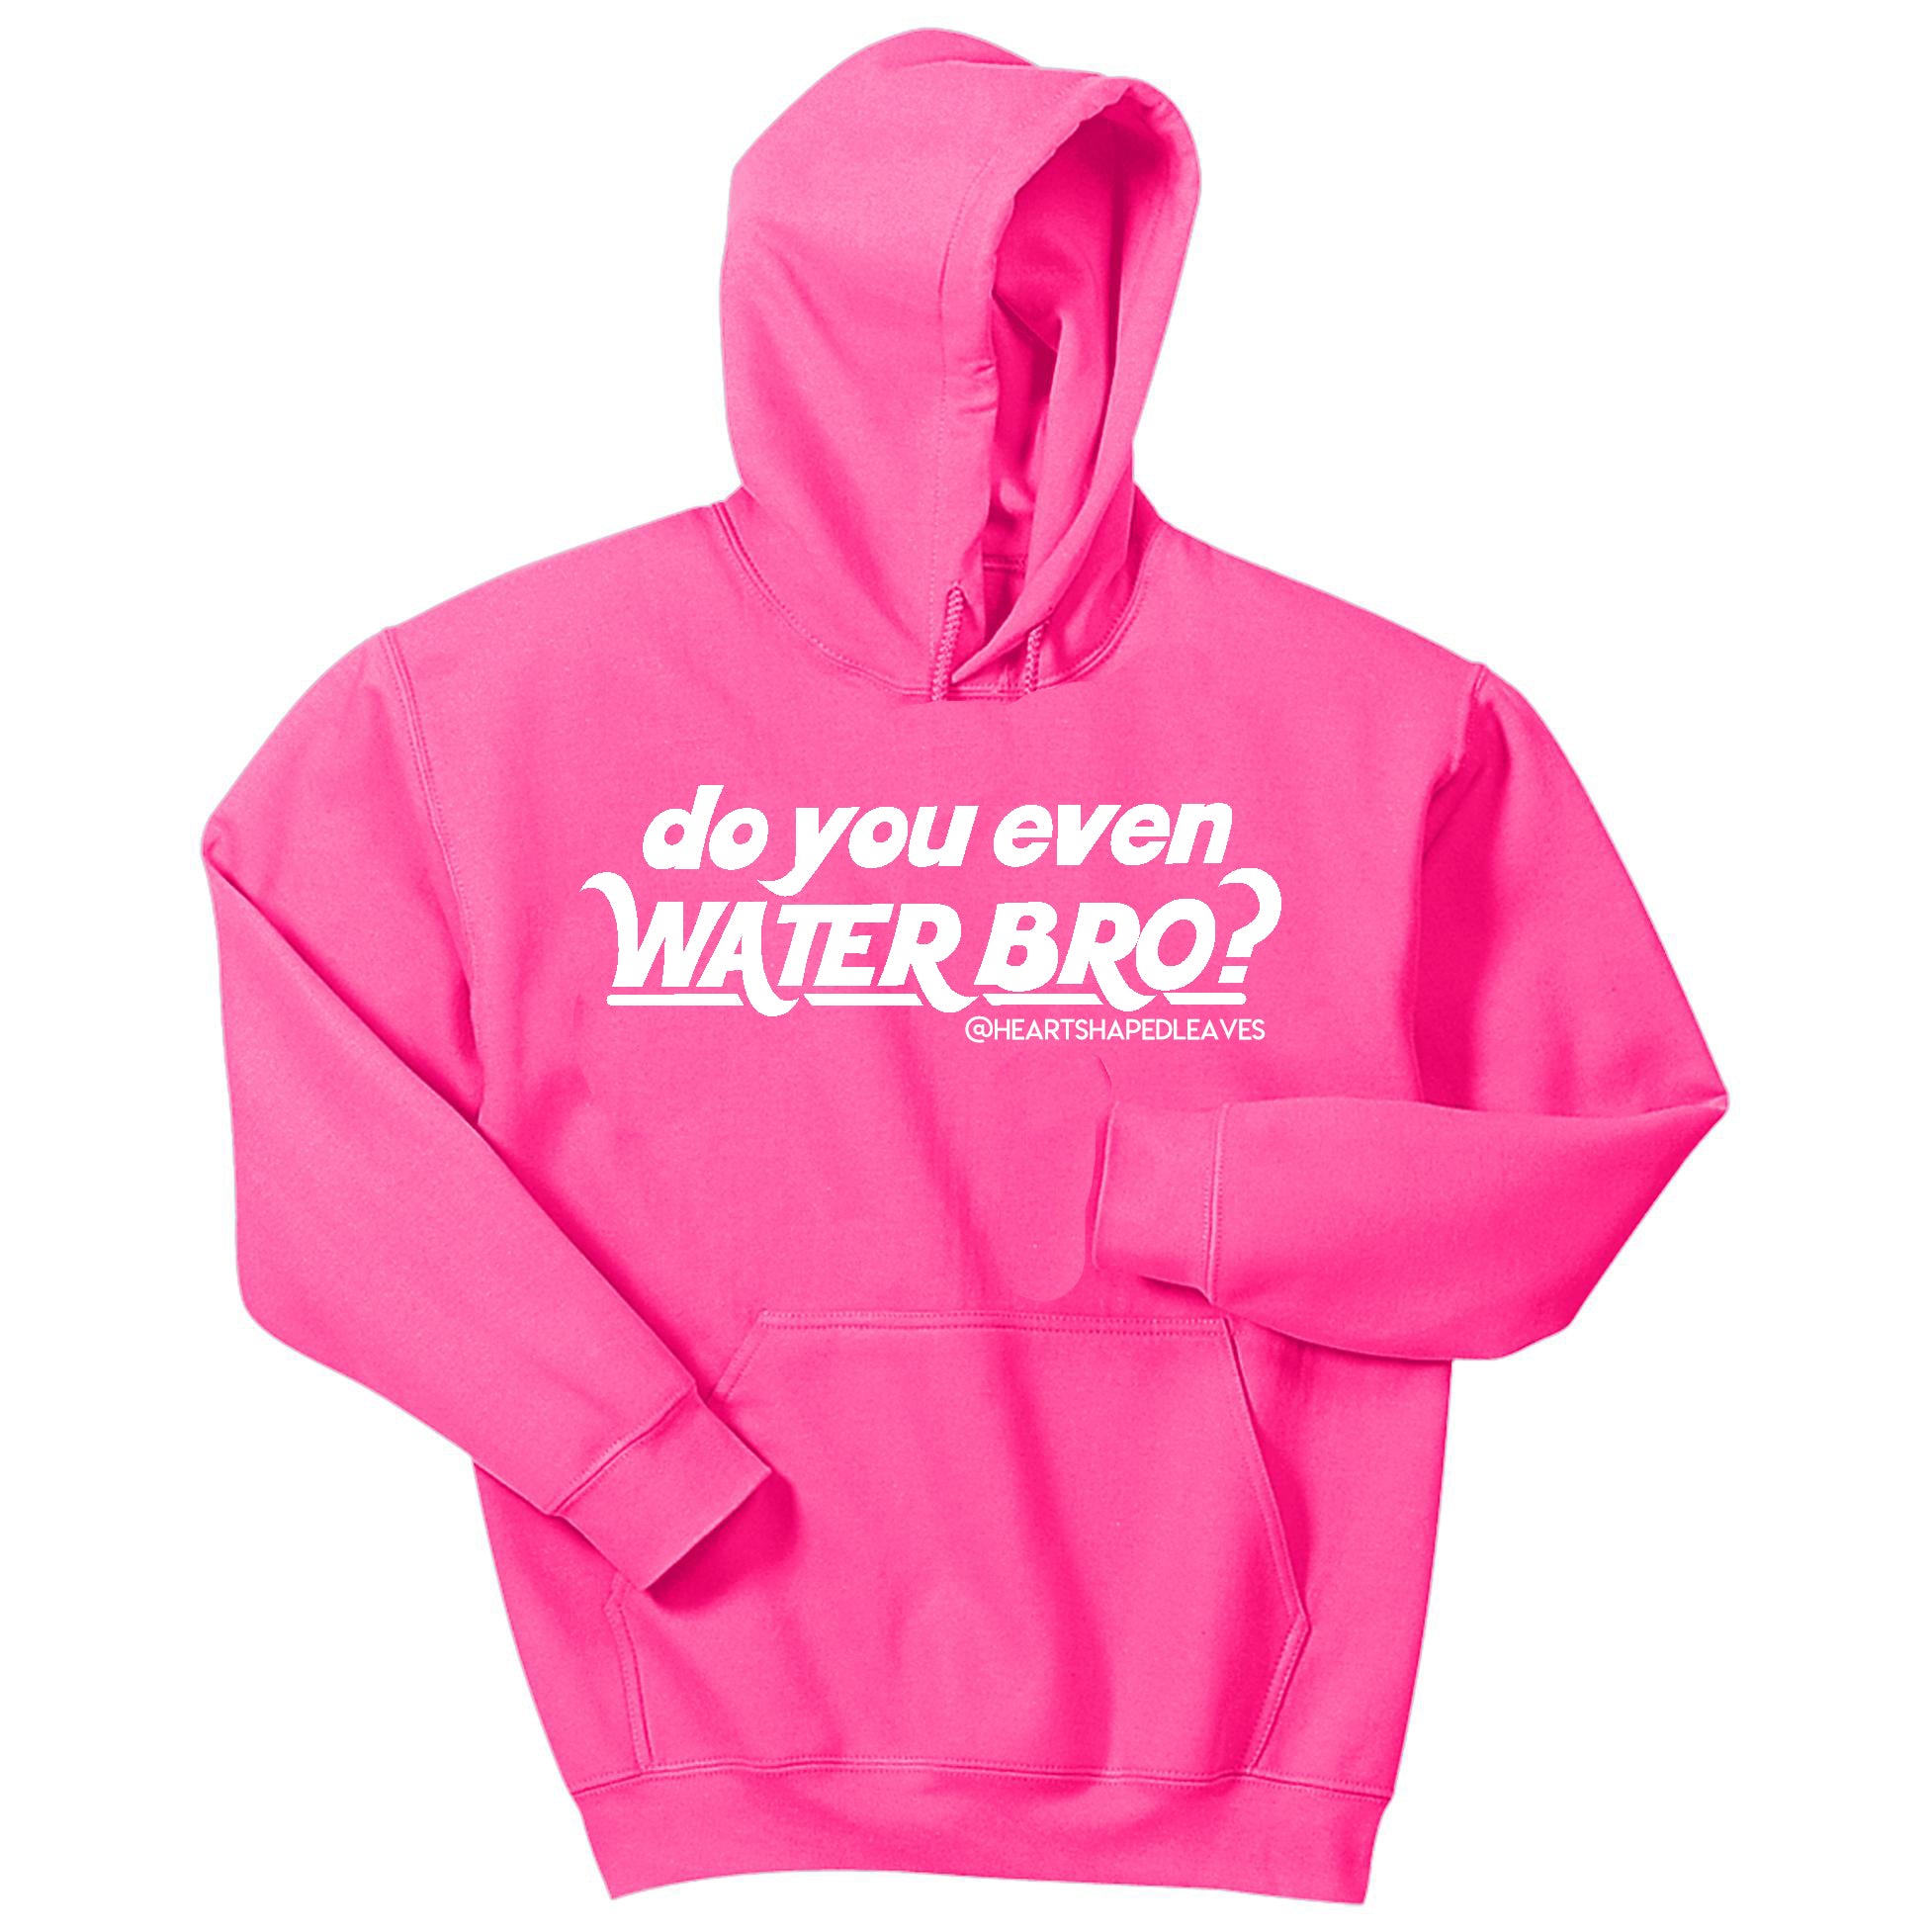 Do You Even Water Bro? Hoodie - Heart Shaped Leaves Merch